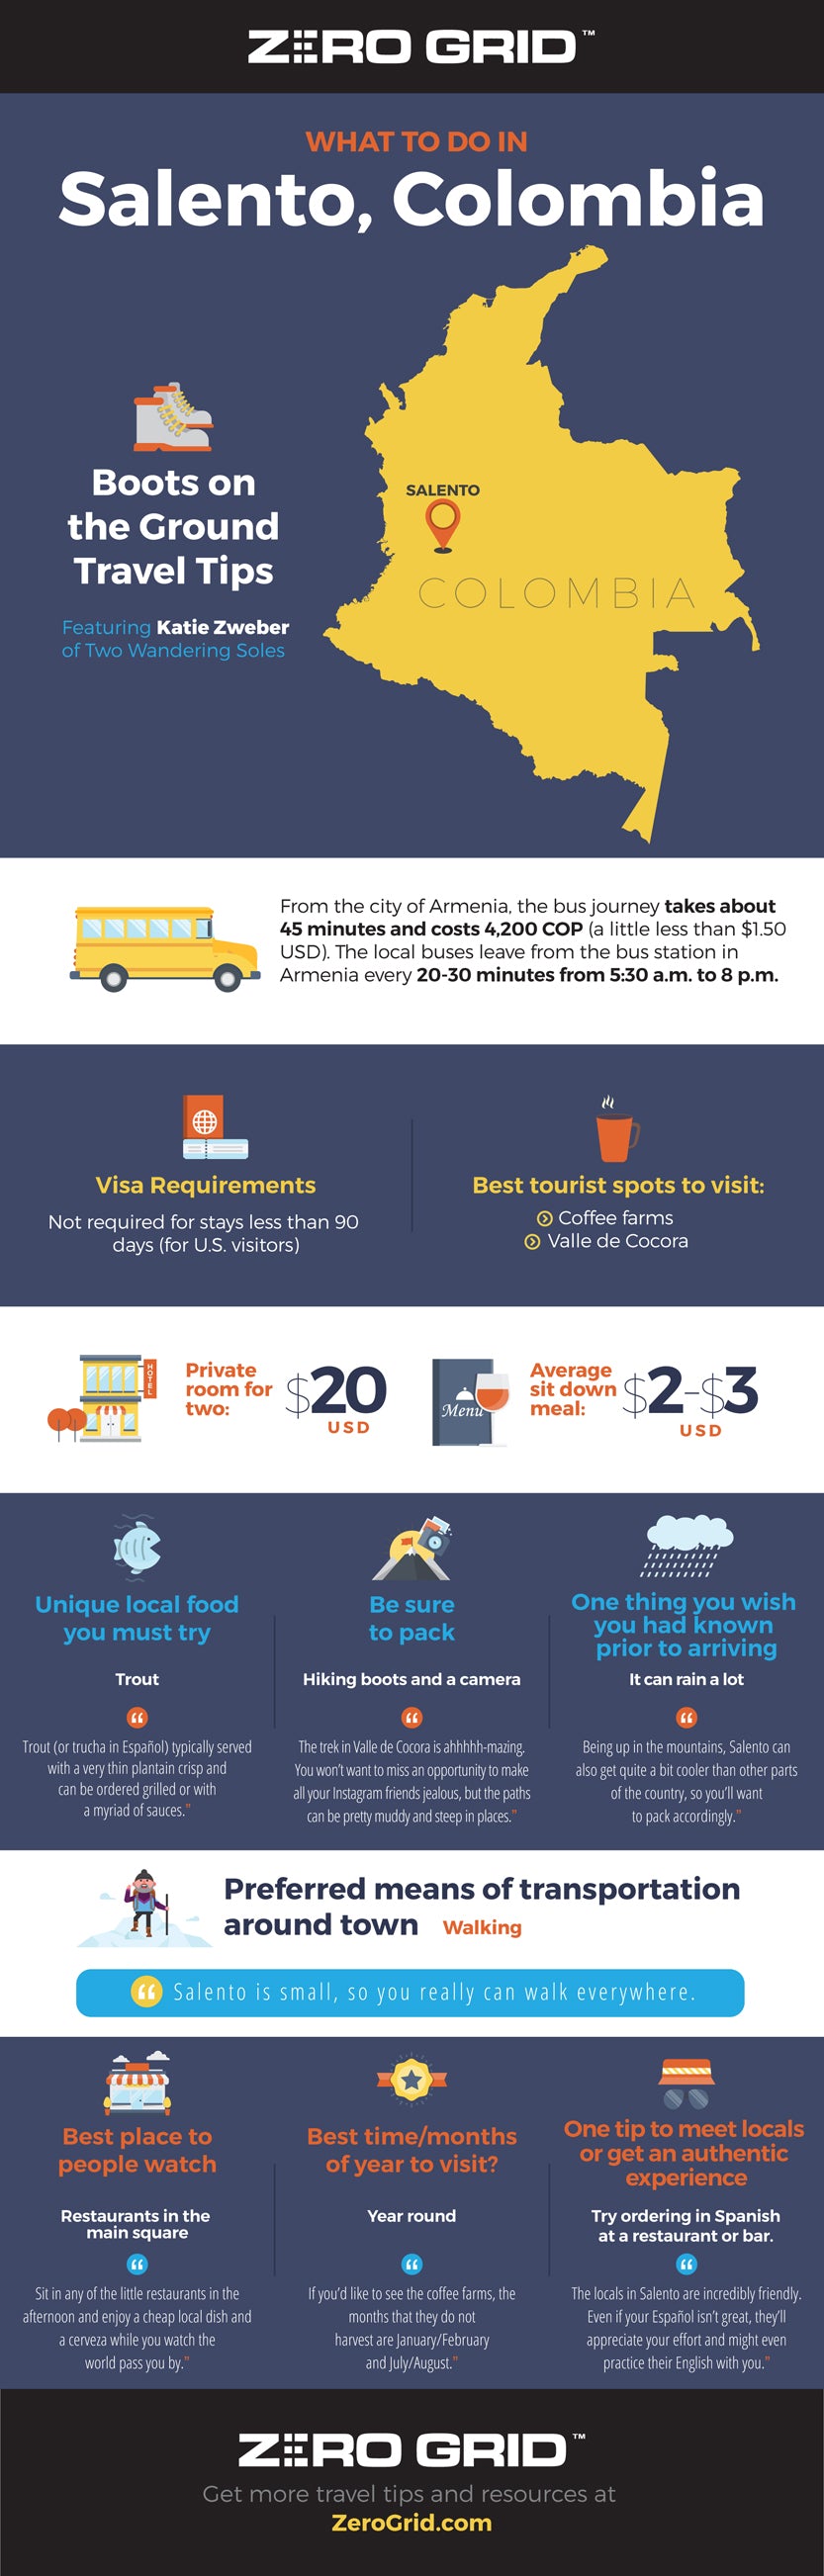 What to do in Salento, Colombia - Infographic